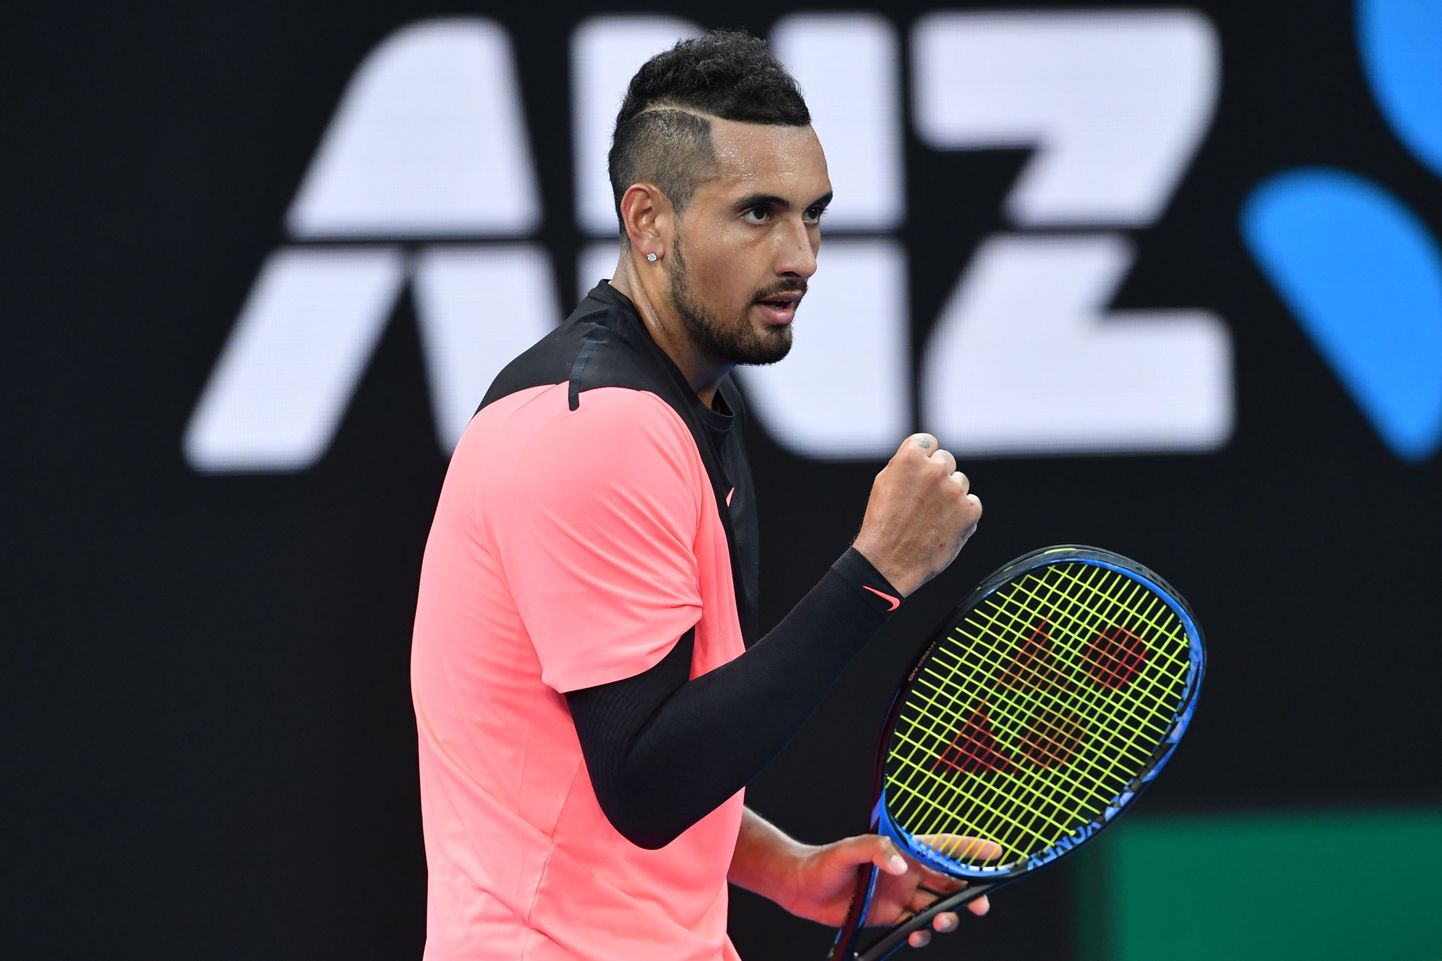 Australia's Nick Kyrgios reacts during their men's singles first round match against Brazil's Rogerio Dutra Silva on day one of the Australian Open tennis tournament in Melbourne on January 15, 2018. / AFP PHOTO / SAEED KHAN / -- IMAGE RESTRICTED TO EDITORIAL USE - STRICTLY NO COMMERCIAL USE --